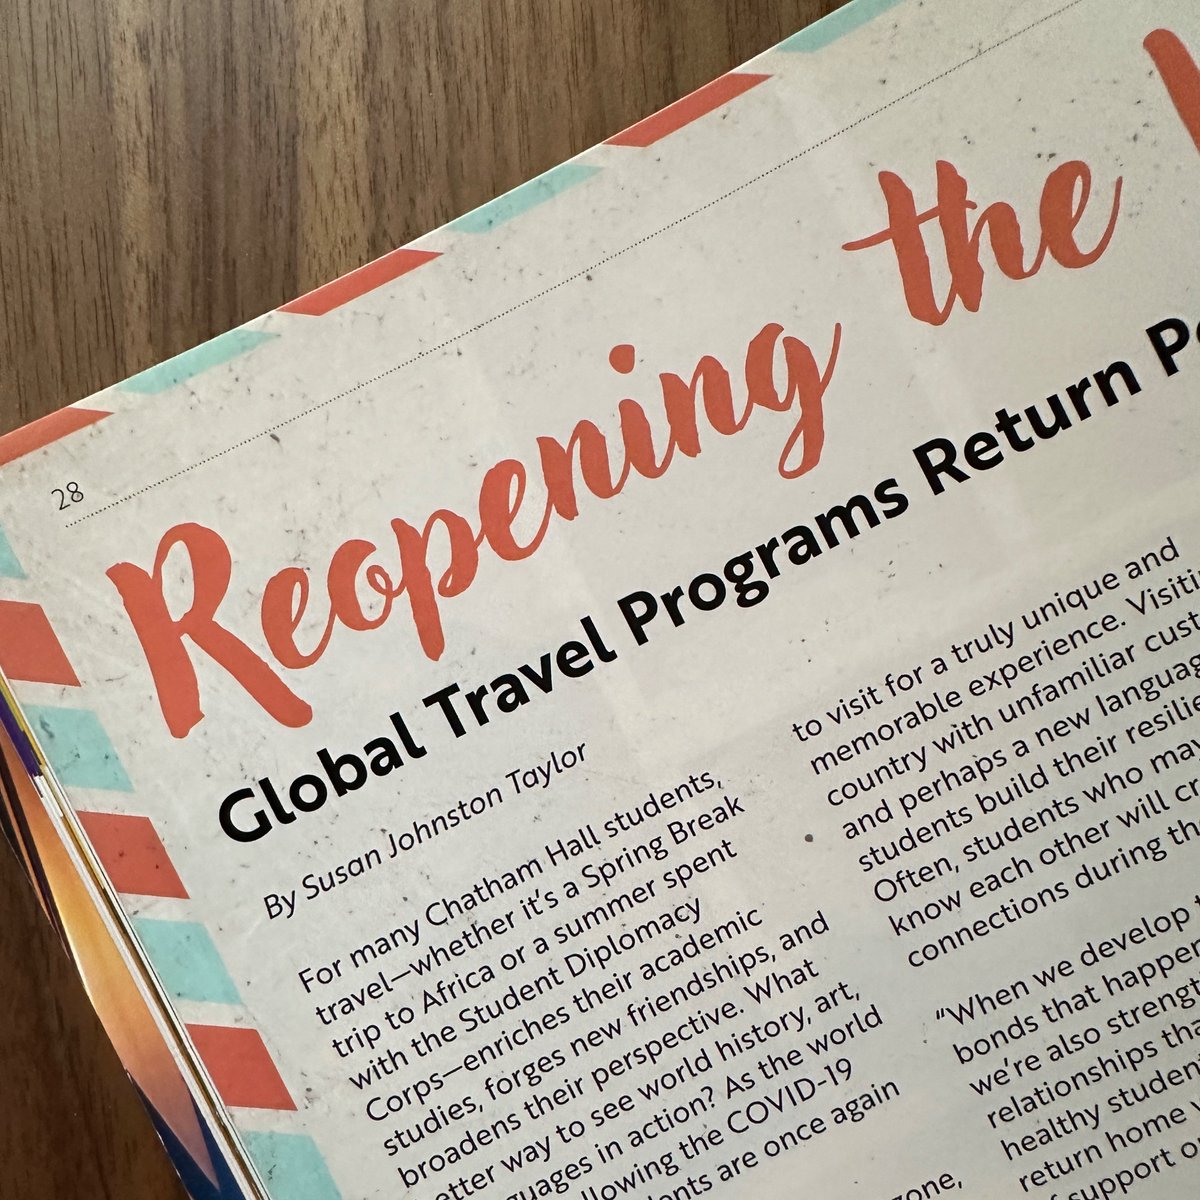 Just got my contributor copy of The Chat Magazine! Loved writing about students returning to global travel and the Guth Leaders in Residence program at Chatham Hall. #AmWriting